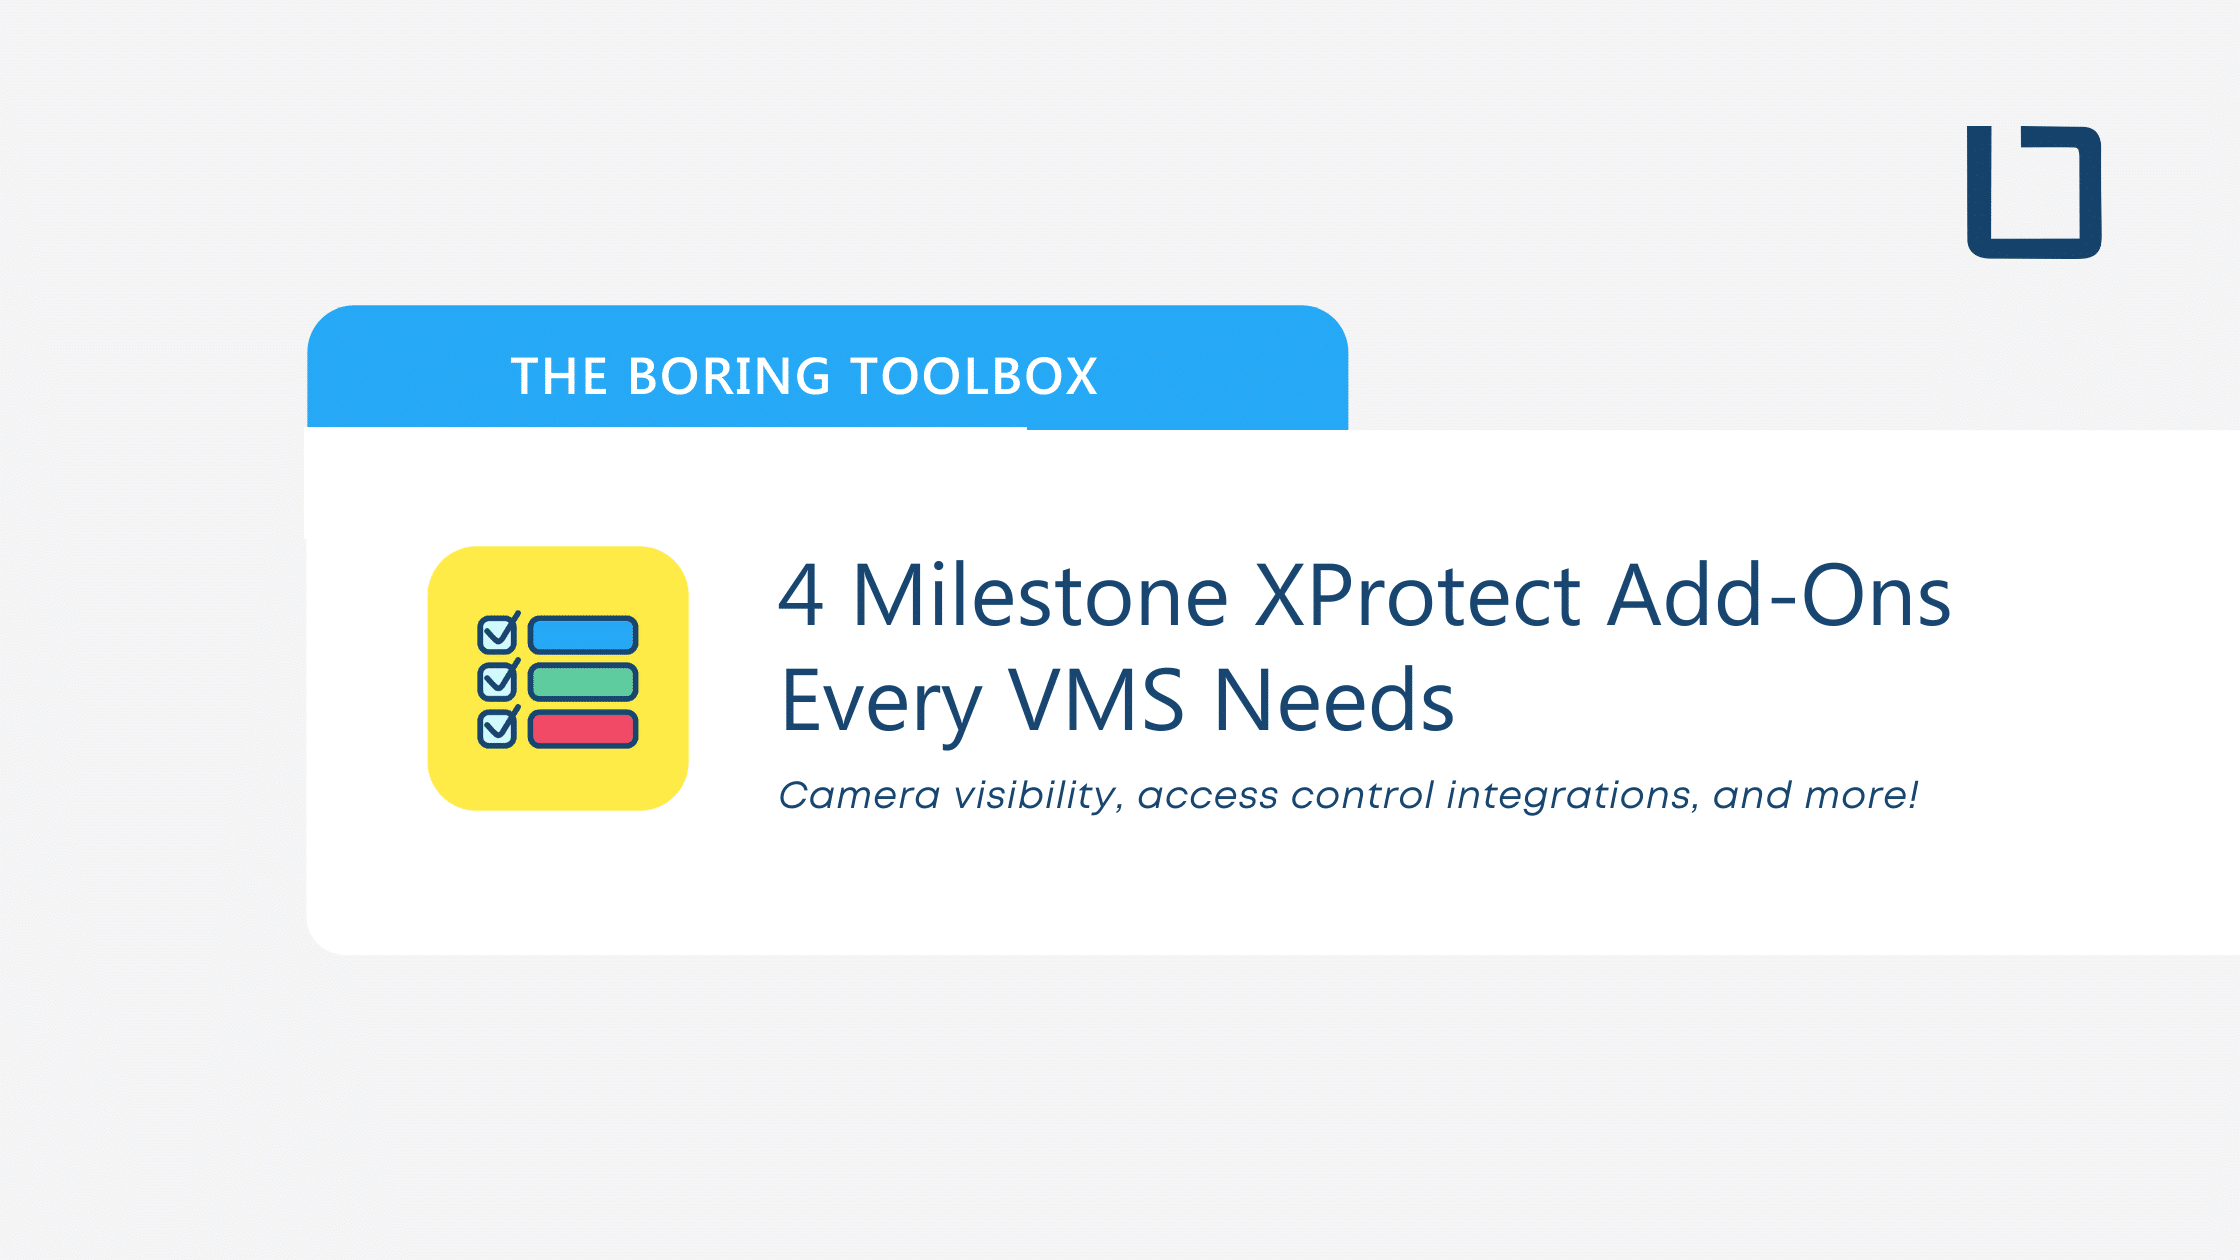 4 Milestone XProtect Add-Ons Every VMS Needs